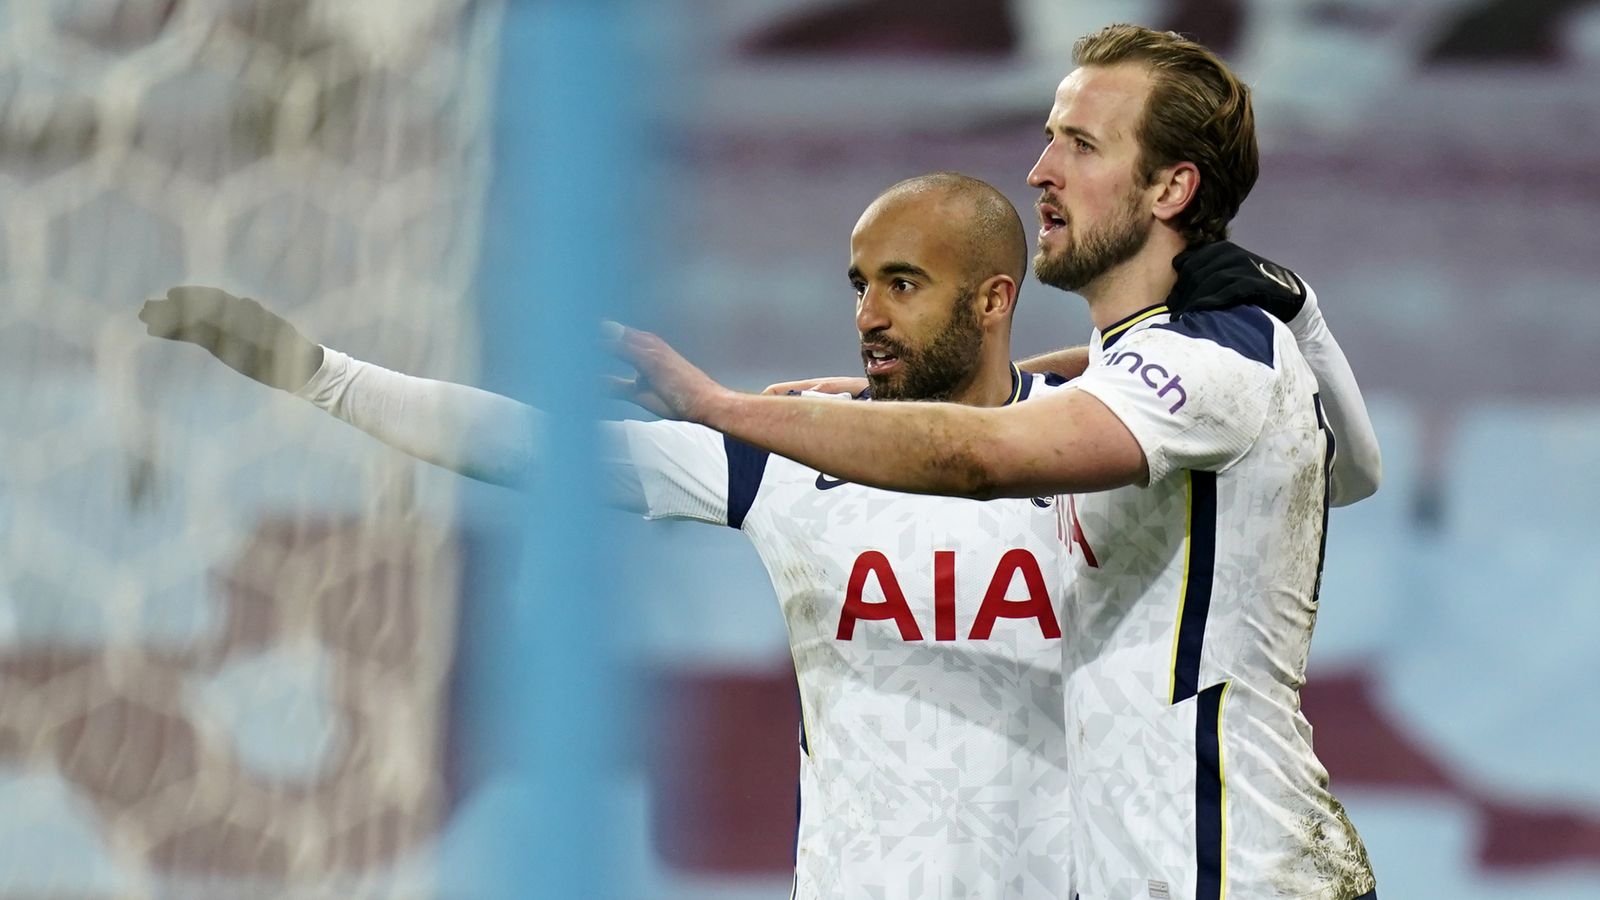 Dulux apologises after making fun of Spurs – immediately after being named their new sponsor